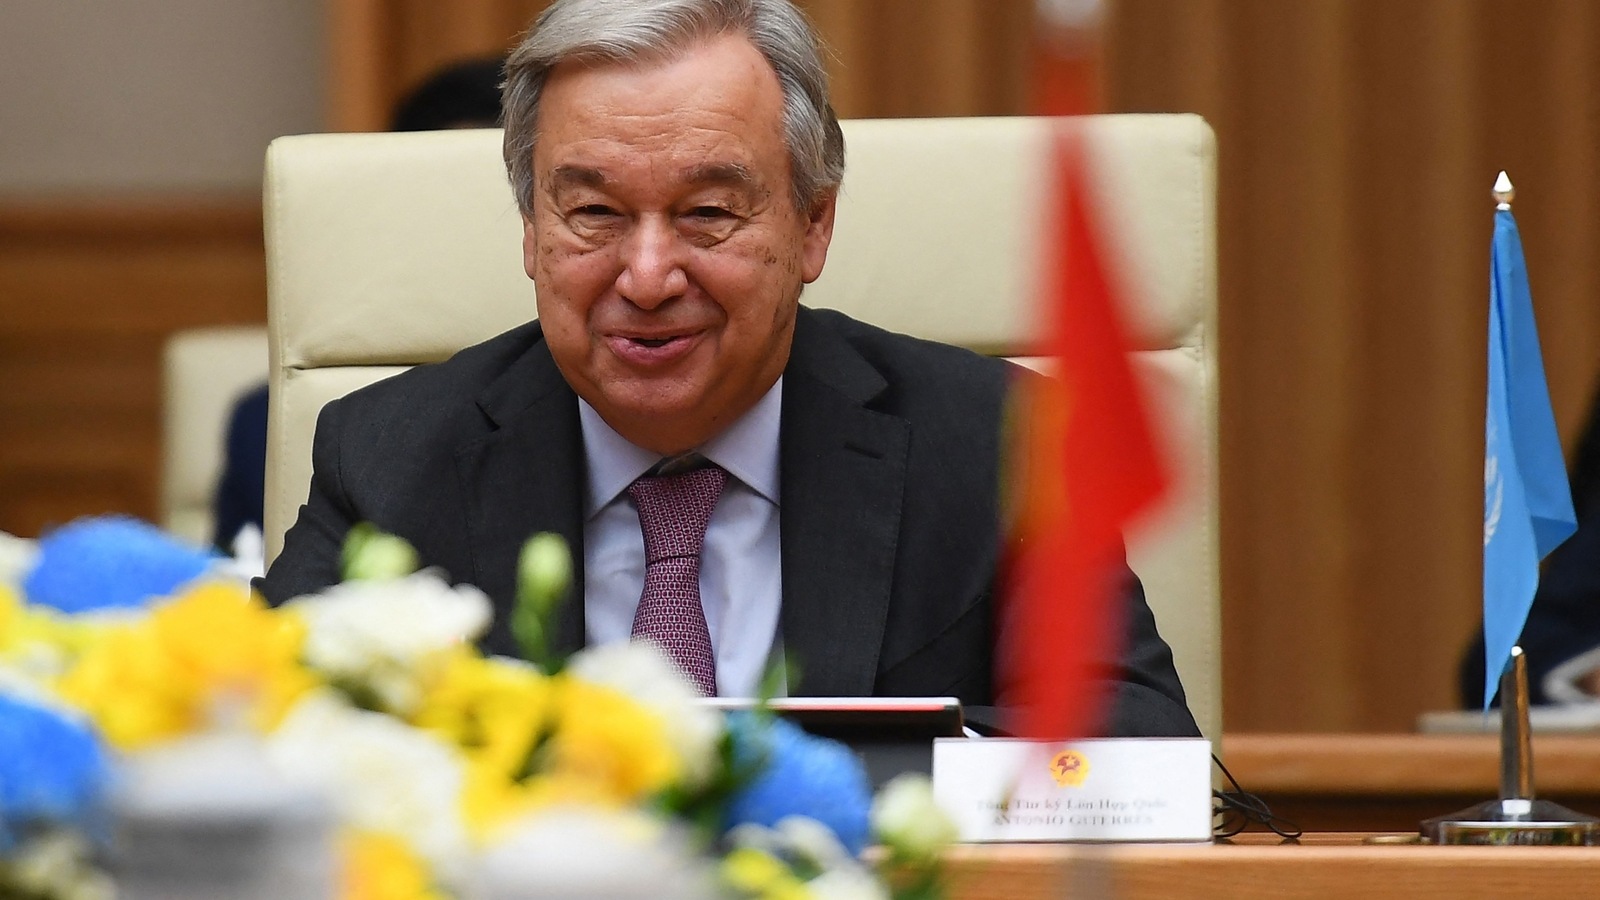 carbon-neutrality-goals-are-useless-if-what-un-chief-said